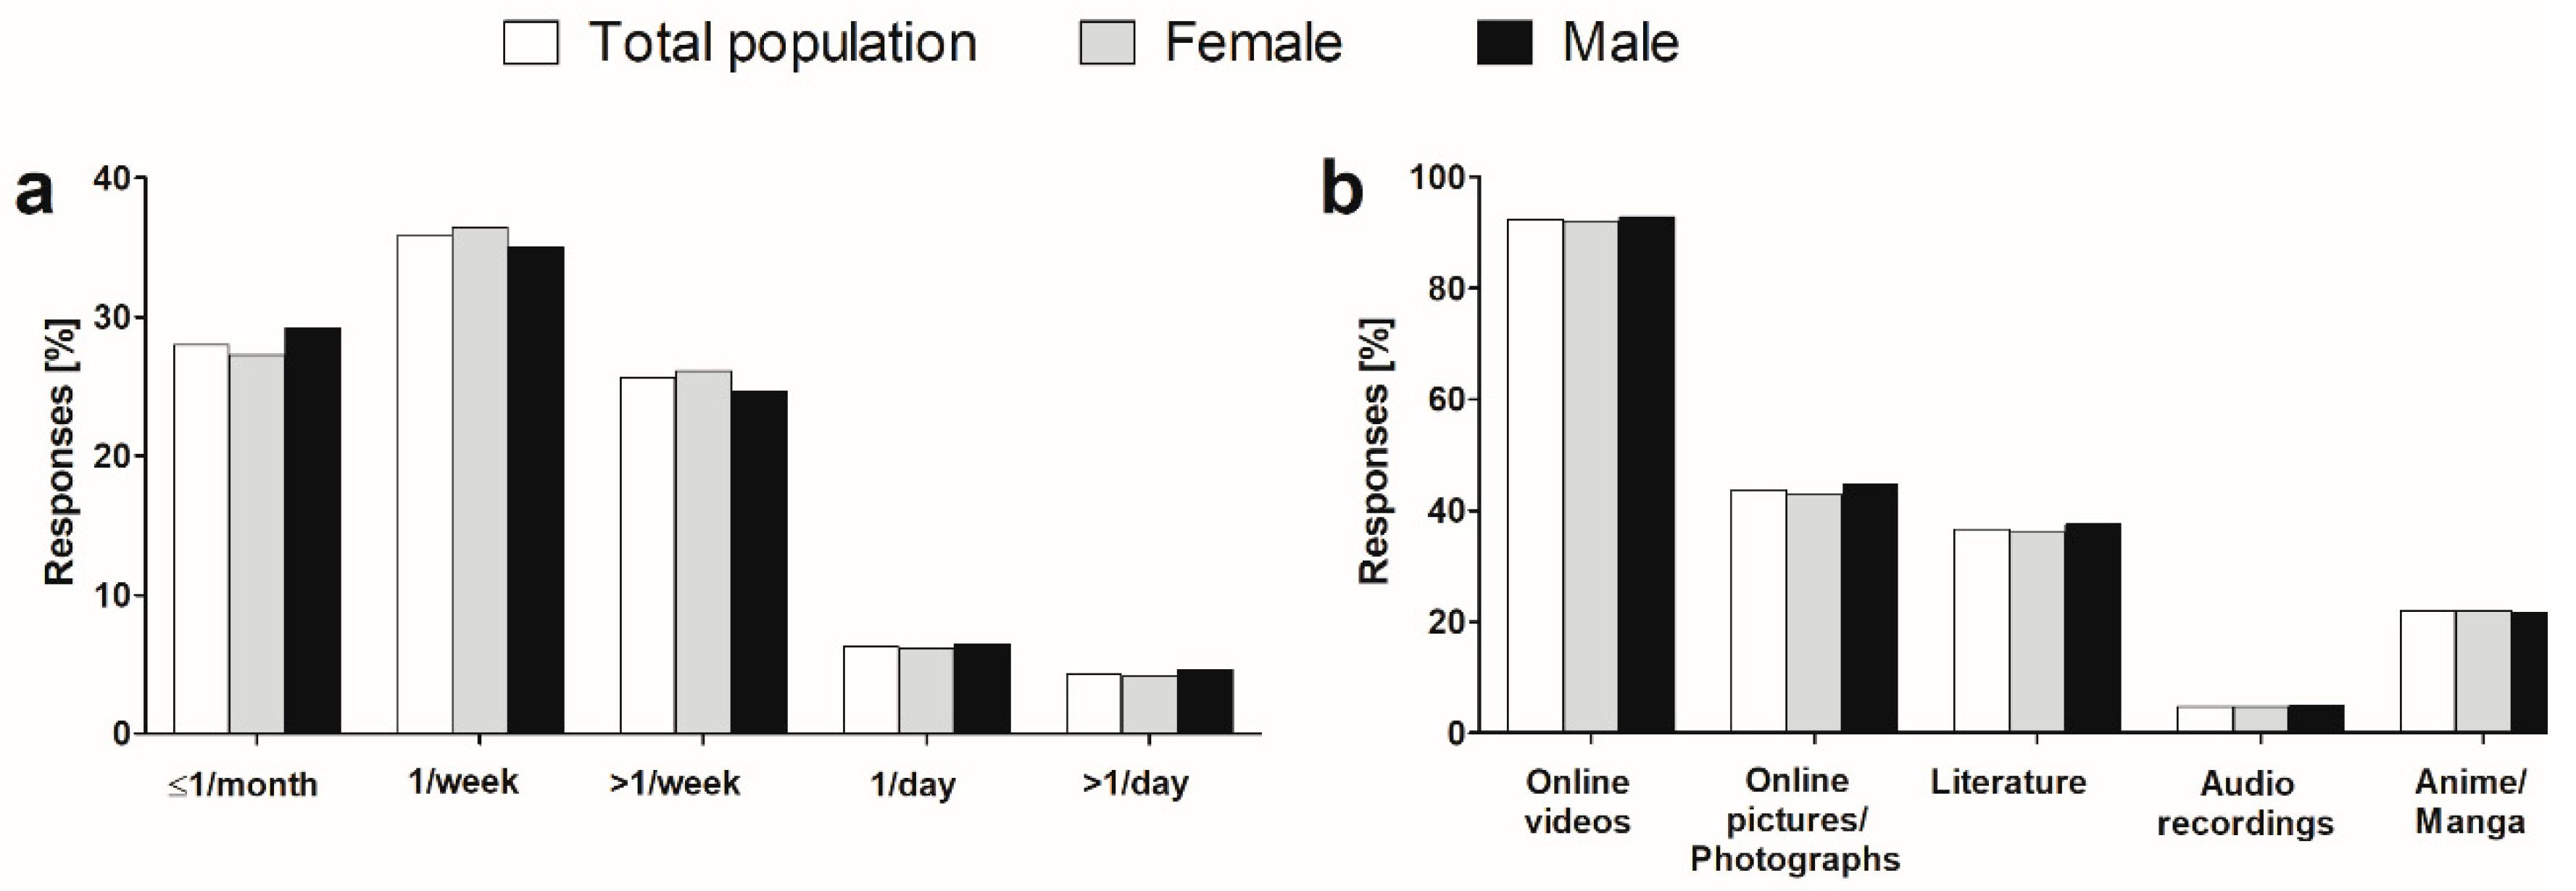 Www China Ten Girl Hd Download Xxxx Video Com - IJERPH | Free Full-Text | Prevalence, Patterns and Self-Perceived Effects  of Pornography Consumption in Polish University Students: A Cross-Sectional  Study